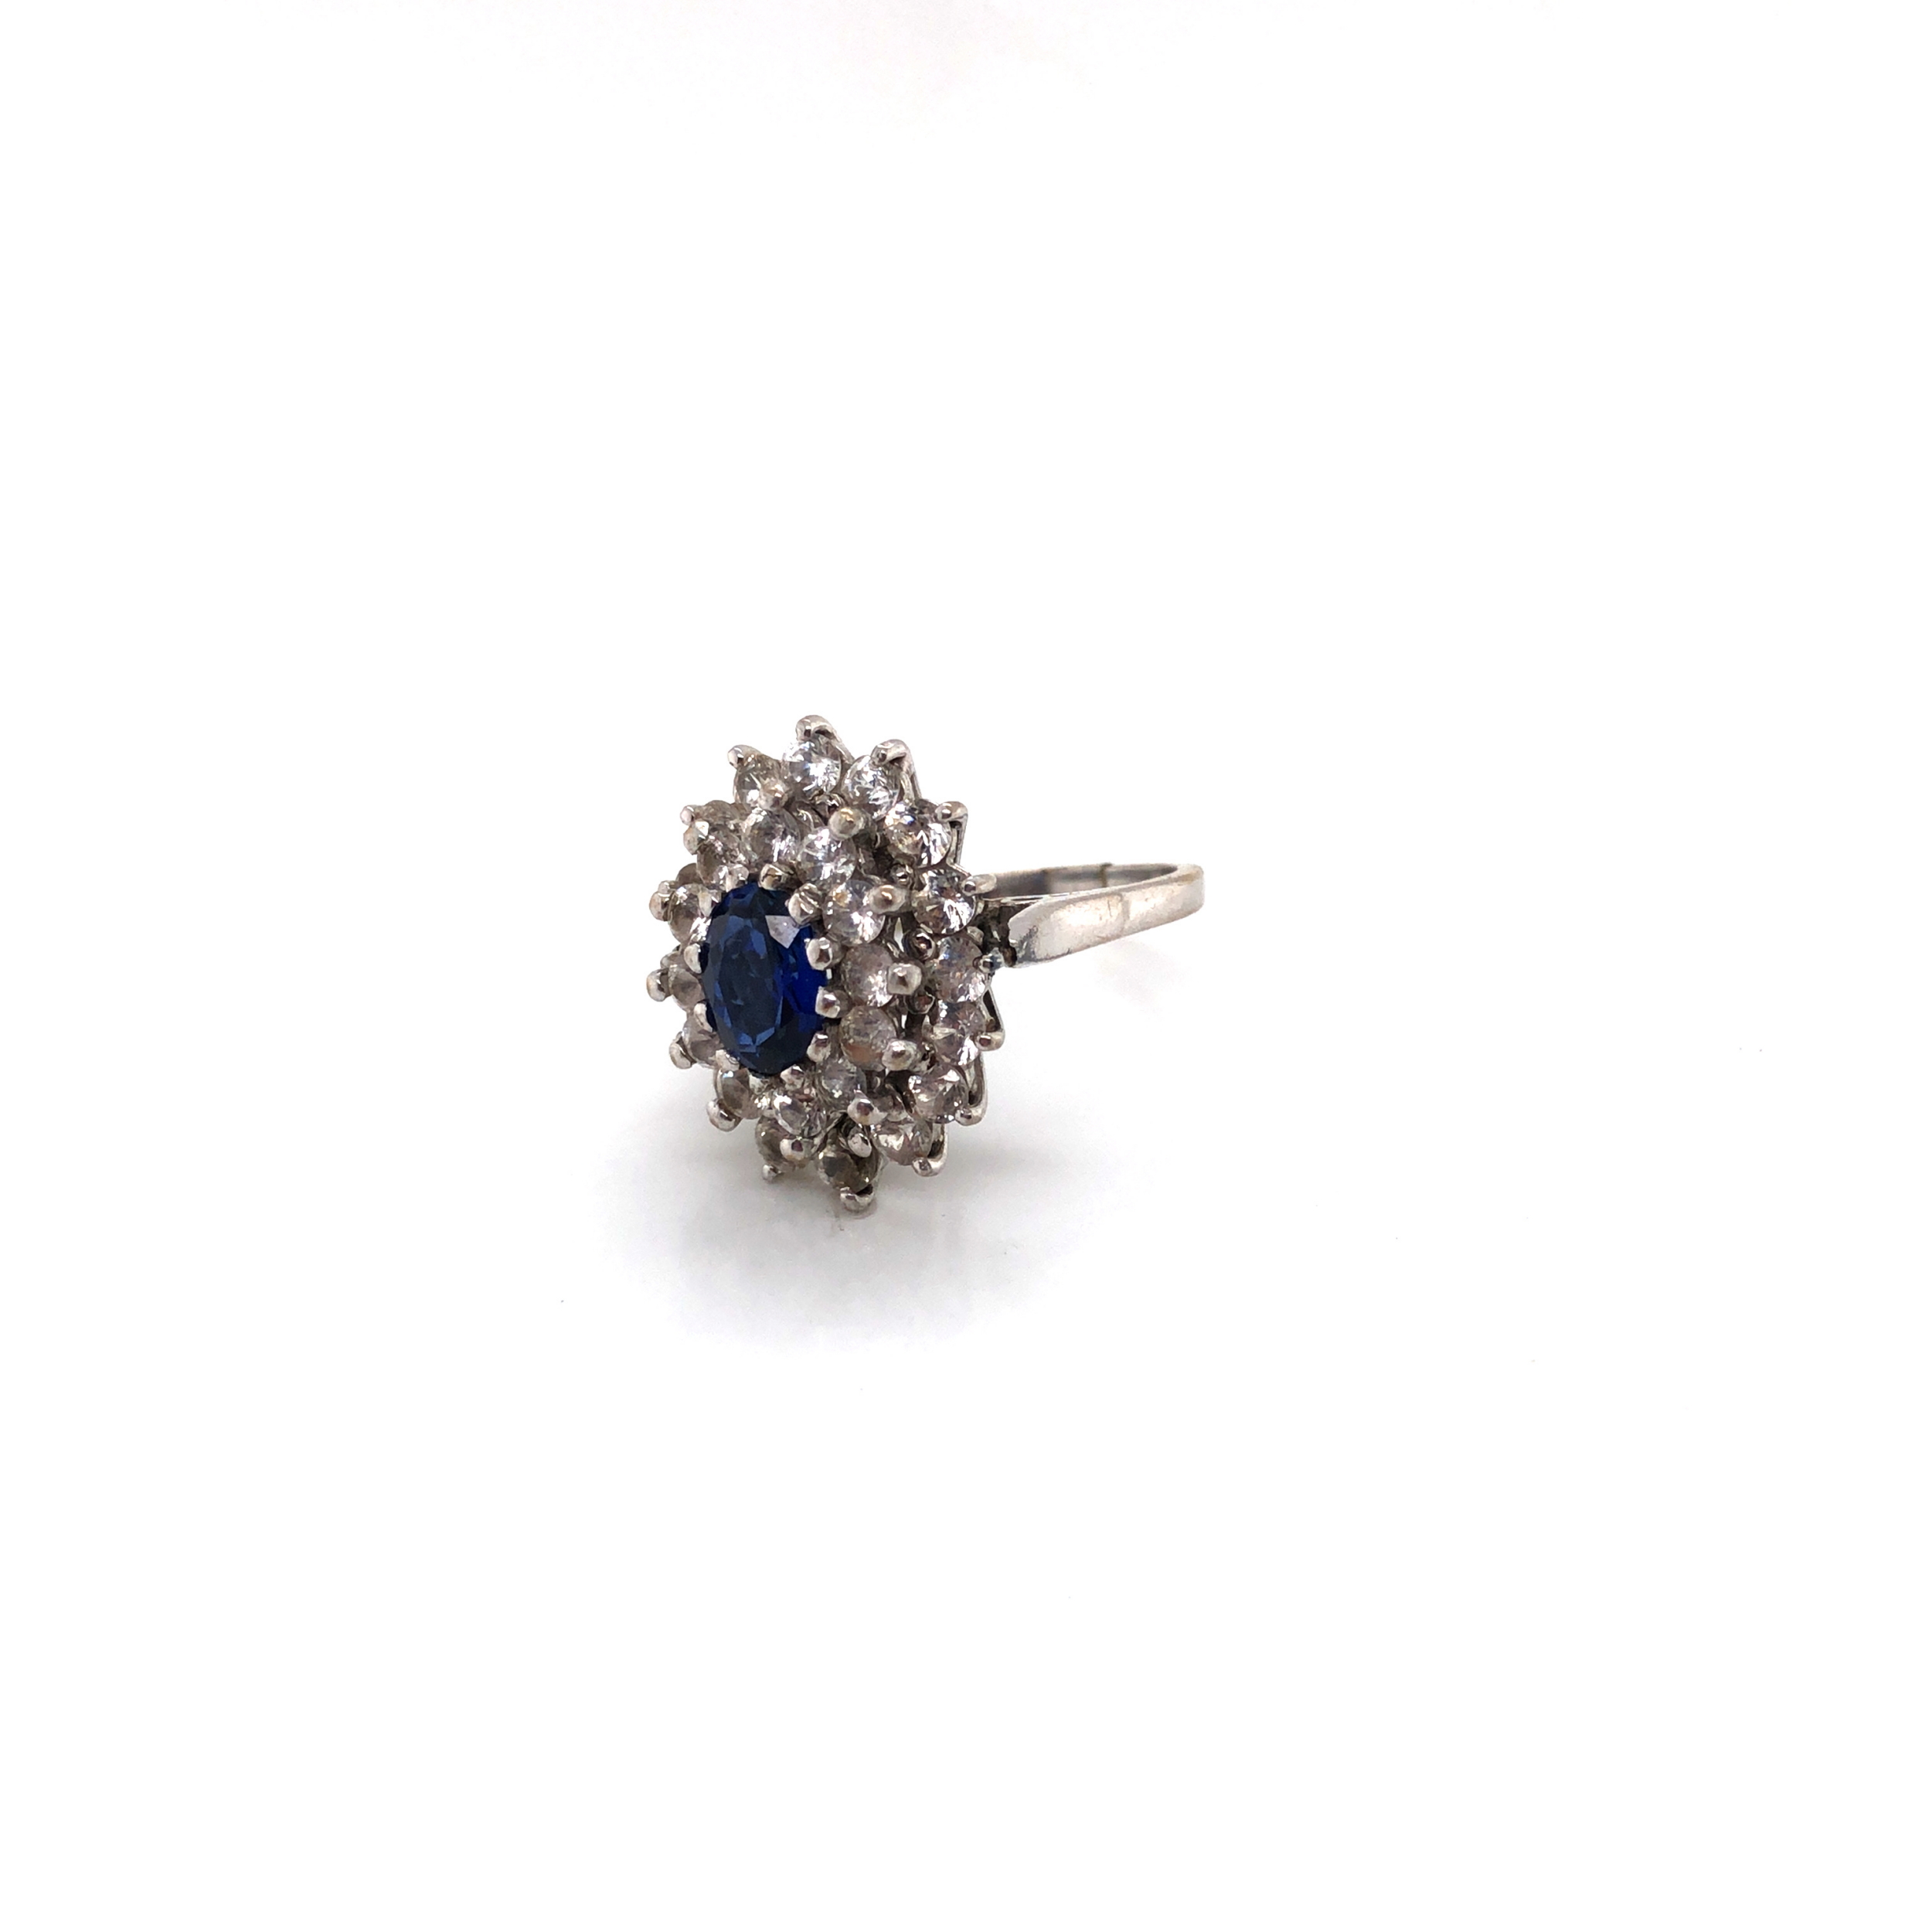 A VINTAGE 18ct WHITE GOLD HALLMARKED SAPPHIRE AND CUBIC ZIRCONIA ASCENDING DOUBLE CLUSTER RING. - Image 2 of 2